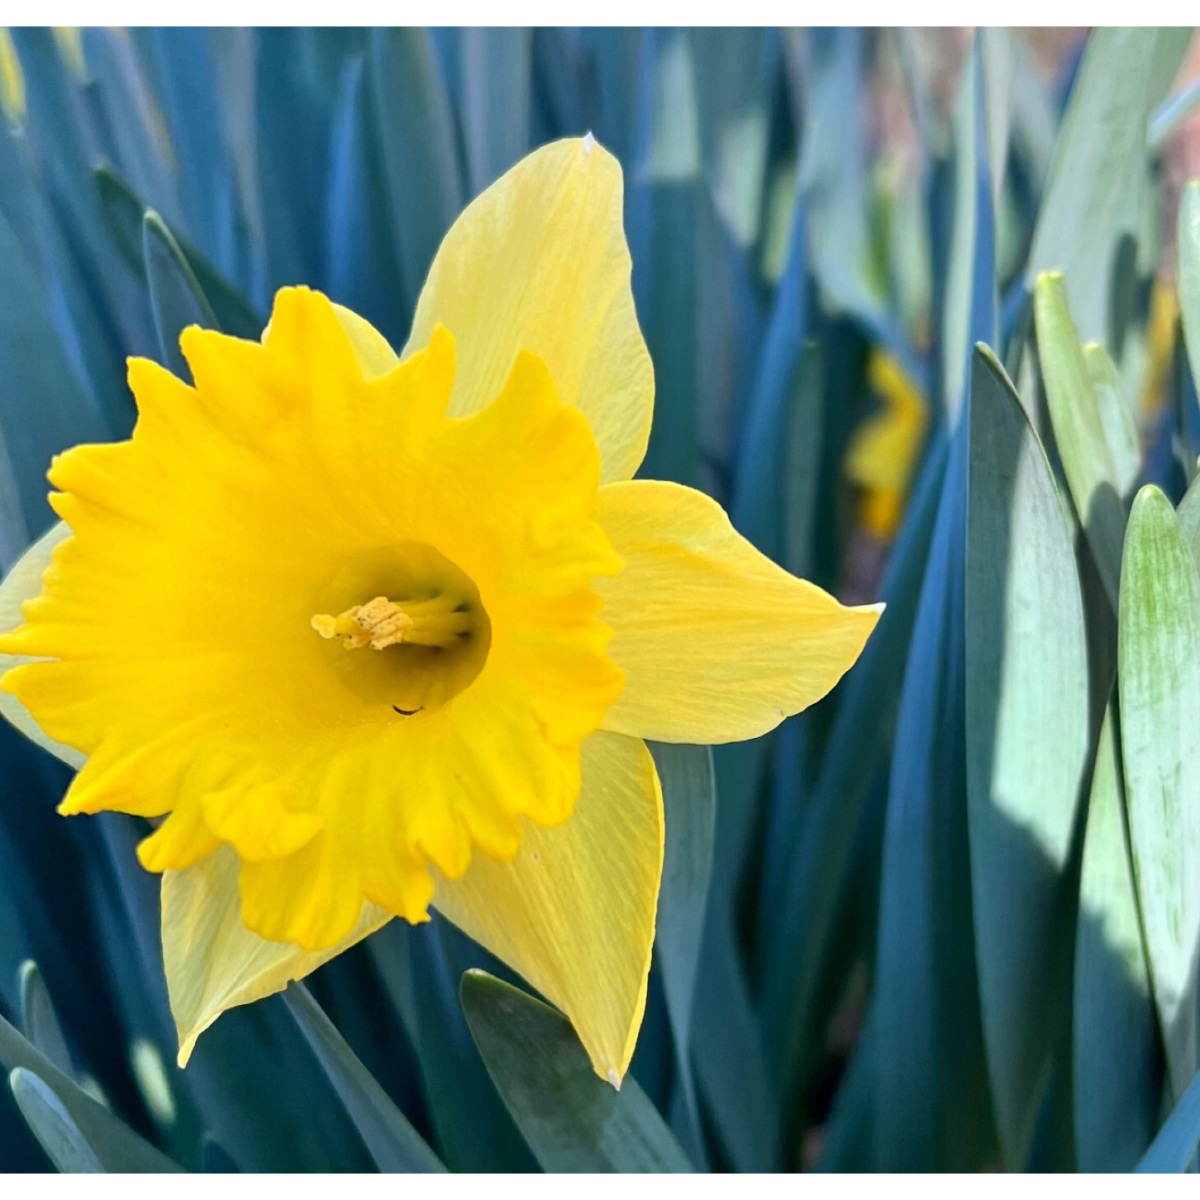 Today I am thankful for… daffodils.